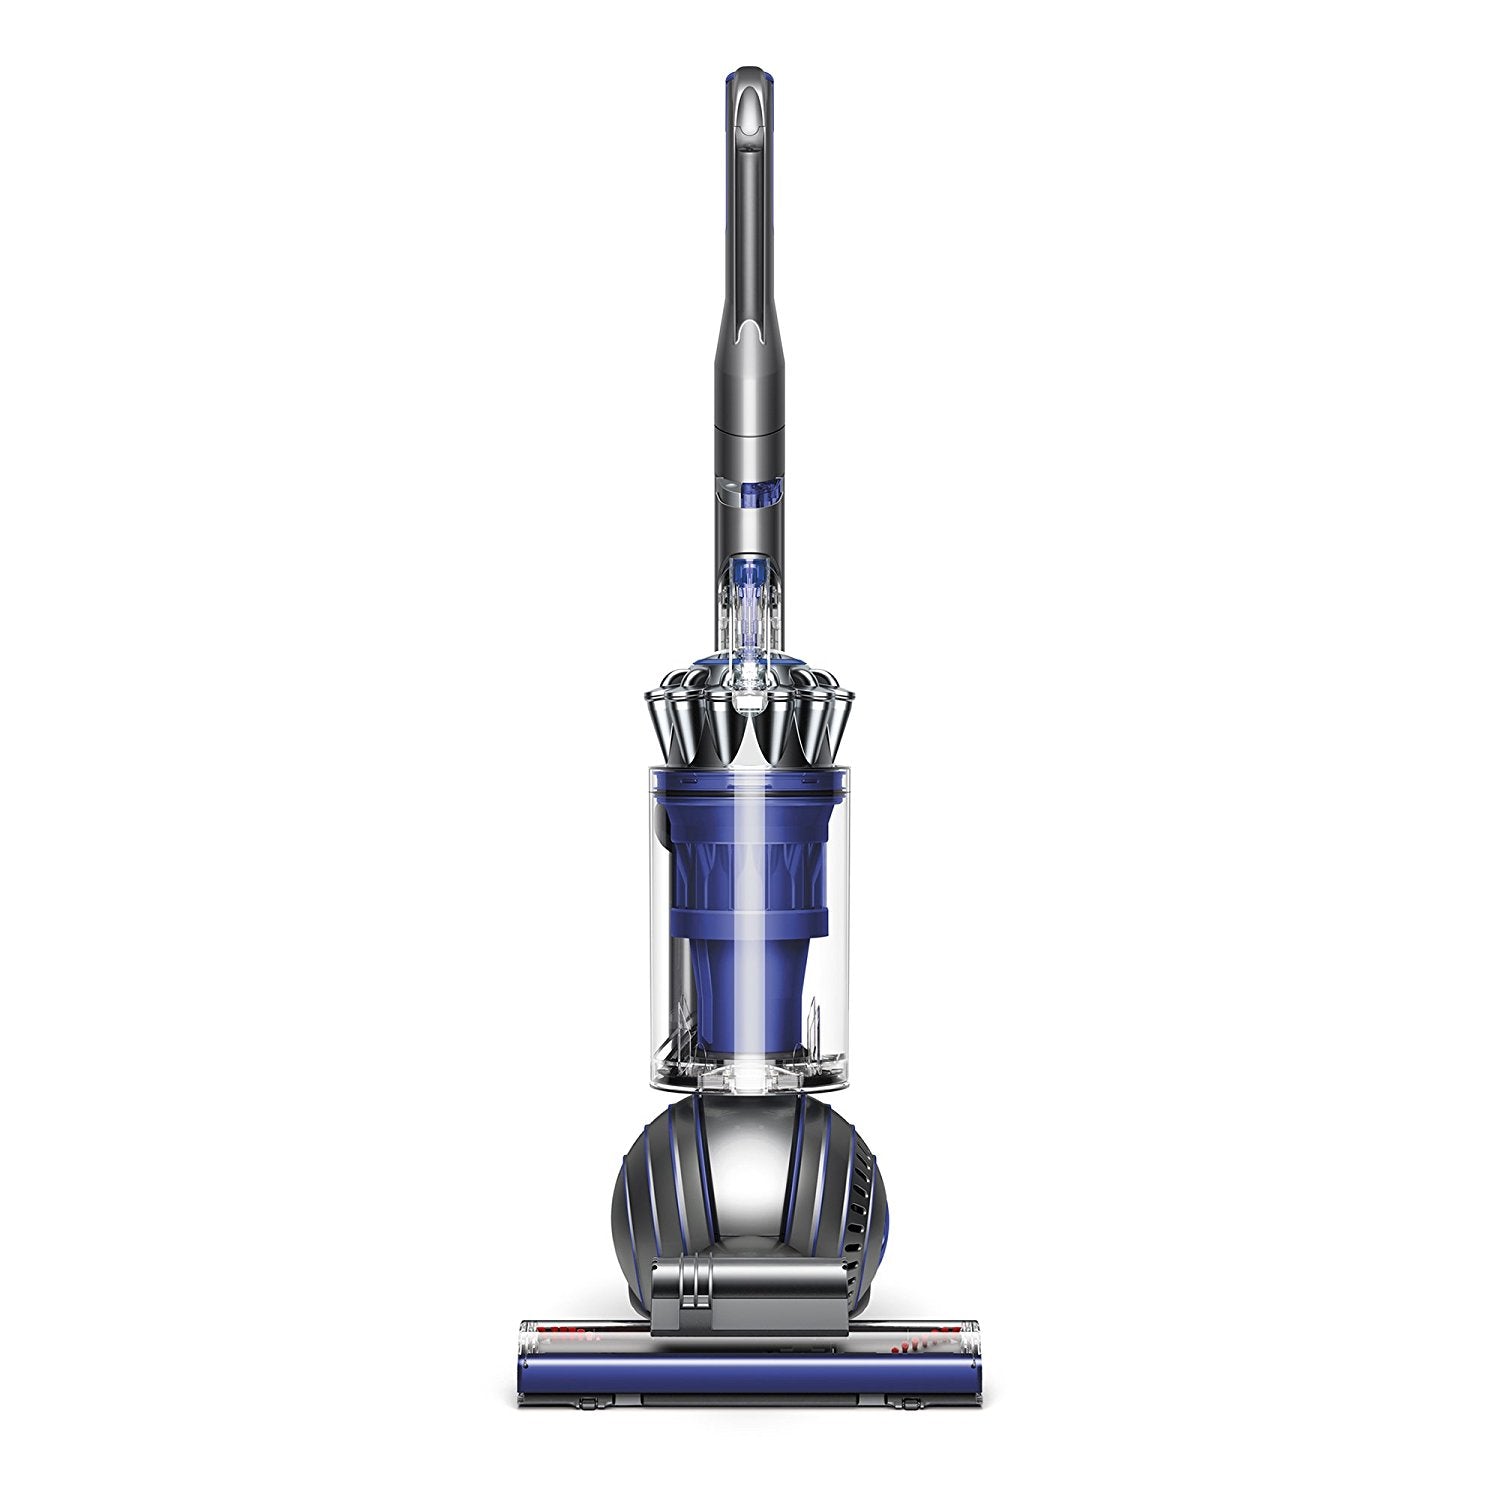 Dyson Ball Animal 2 Total Clean Vacuum Cleaner.Self-adjusting cleaner head seals in suction. Cleans up high and under furniture. Removes pet hair without tangling.Six extra tools and a tool storage bag.Certified asthma and allergy friendly.5 year warranty